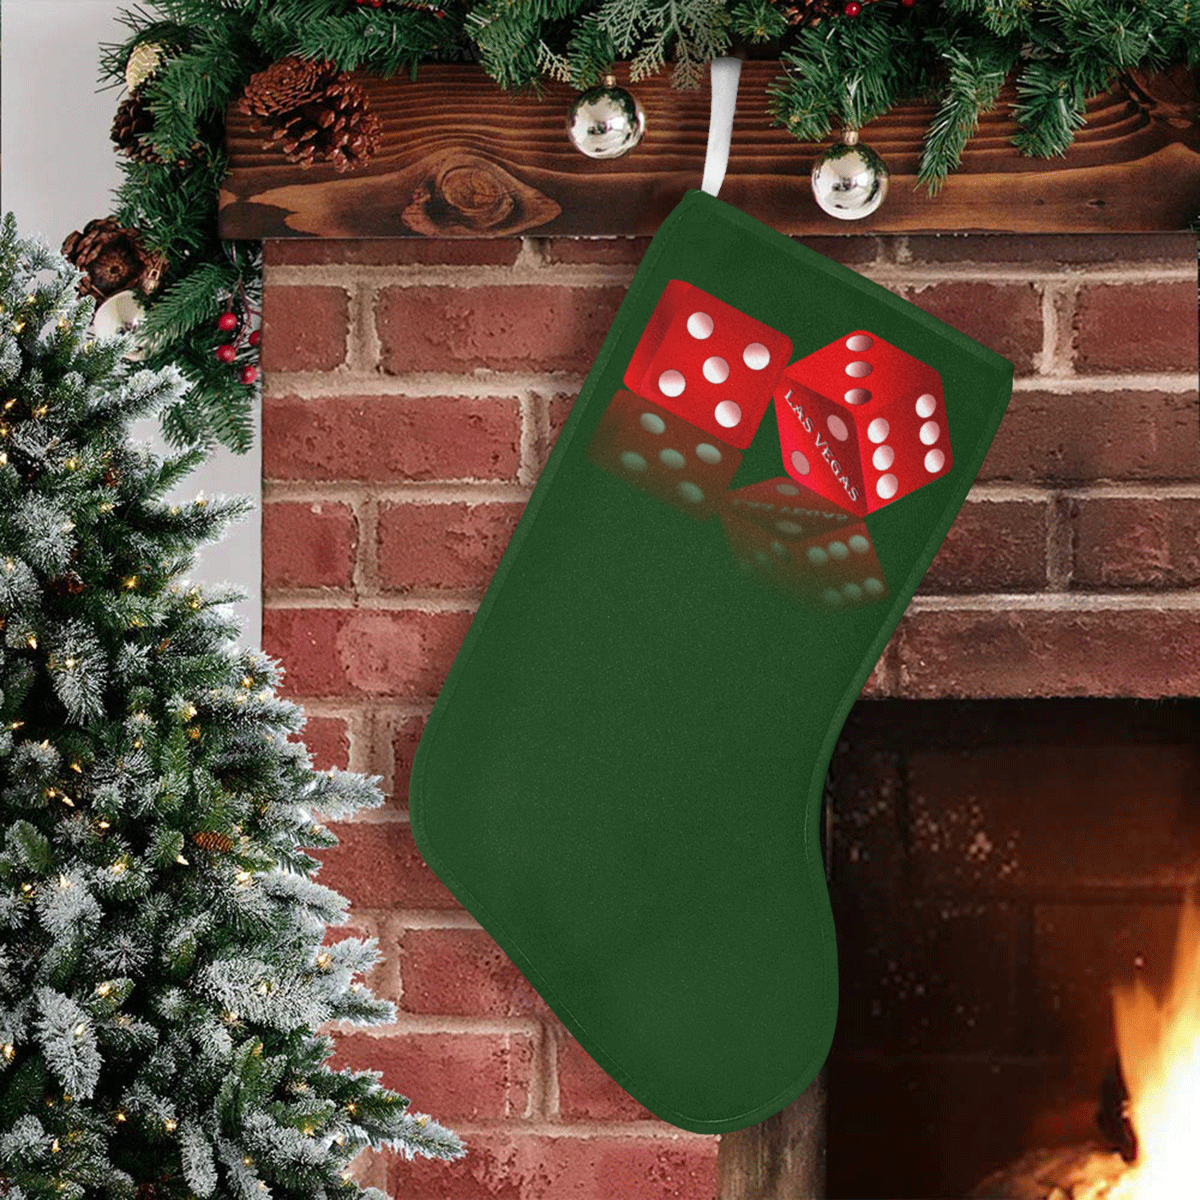 Las Vegas Craps Dice on Green Christmas Stocking (Without Folded Top)